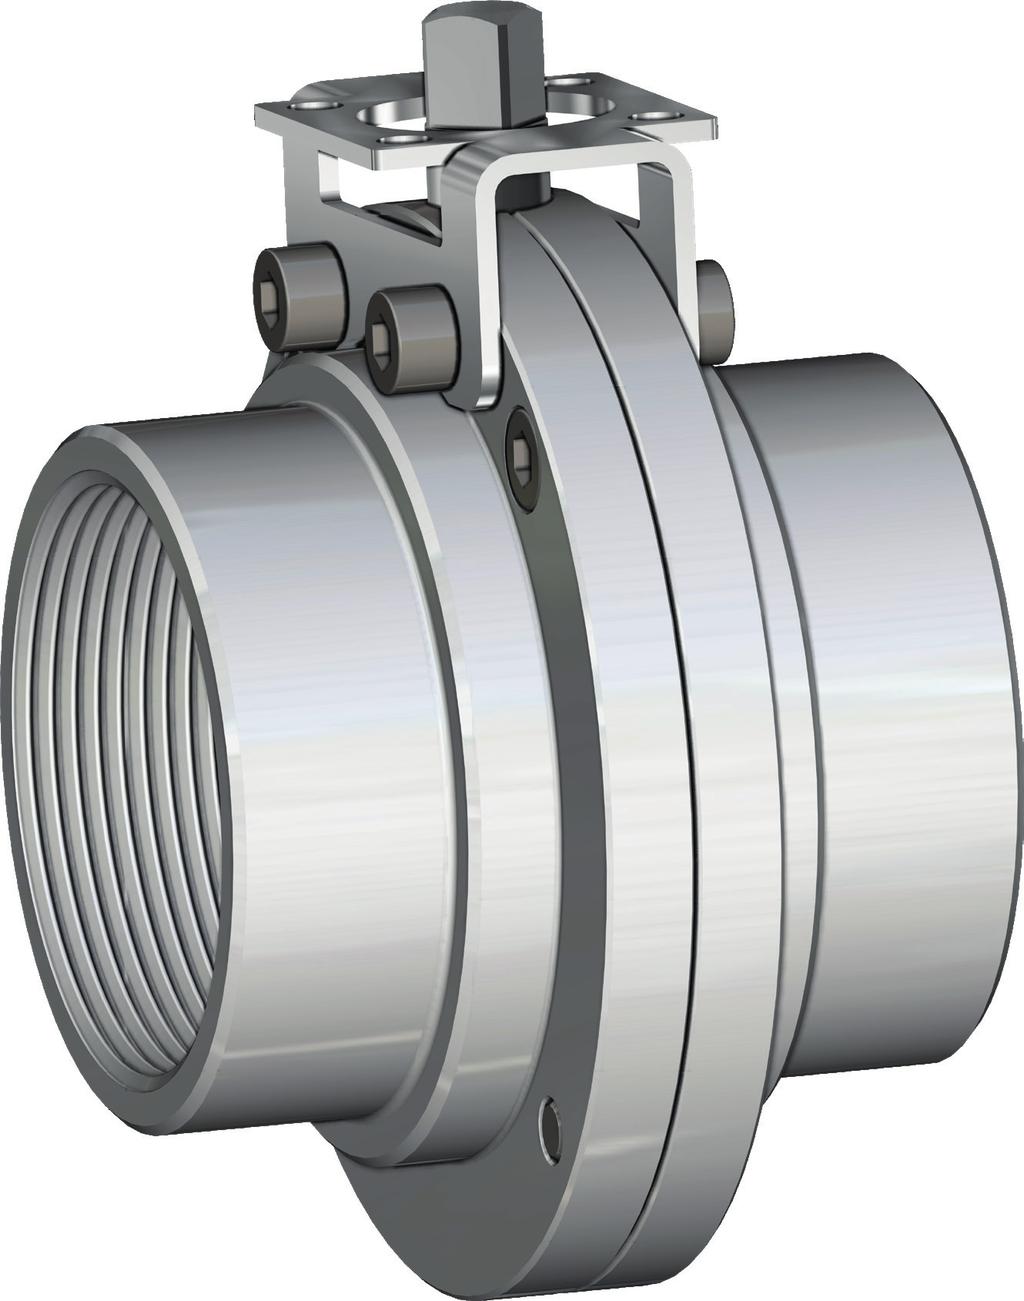 ITEM 90-9-9-9 Valvola a farfalla vie filettata ISO 8/, DIN 85, da saldare, clamp Stainless steel butterfly valve with ISO 8/ threaded, butt welded, DIN 85 ends, clamp ITEM 90 Connessioni: Filettate